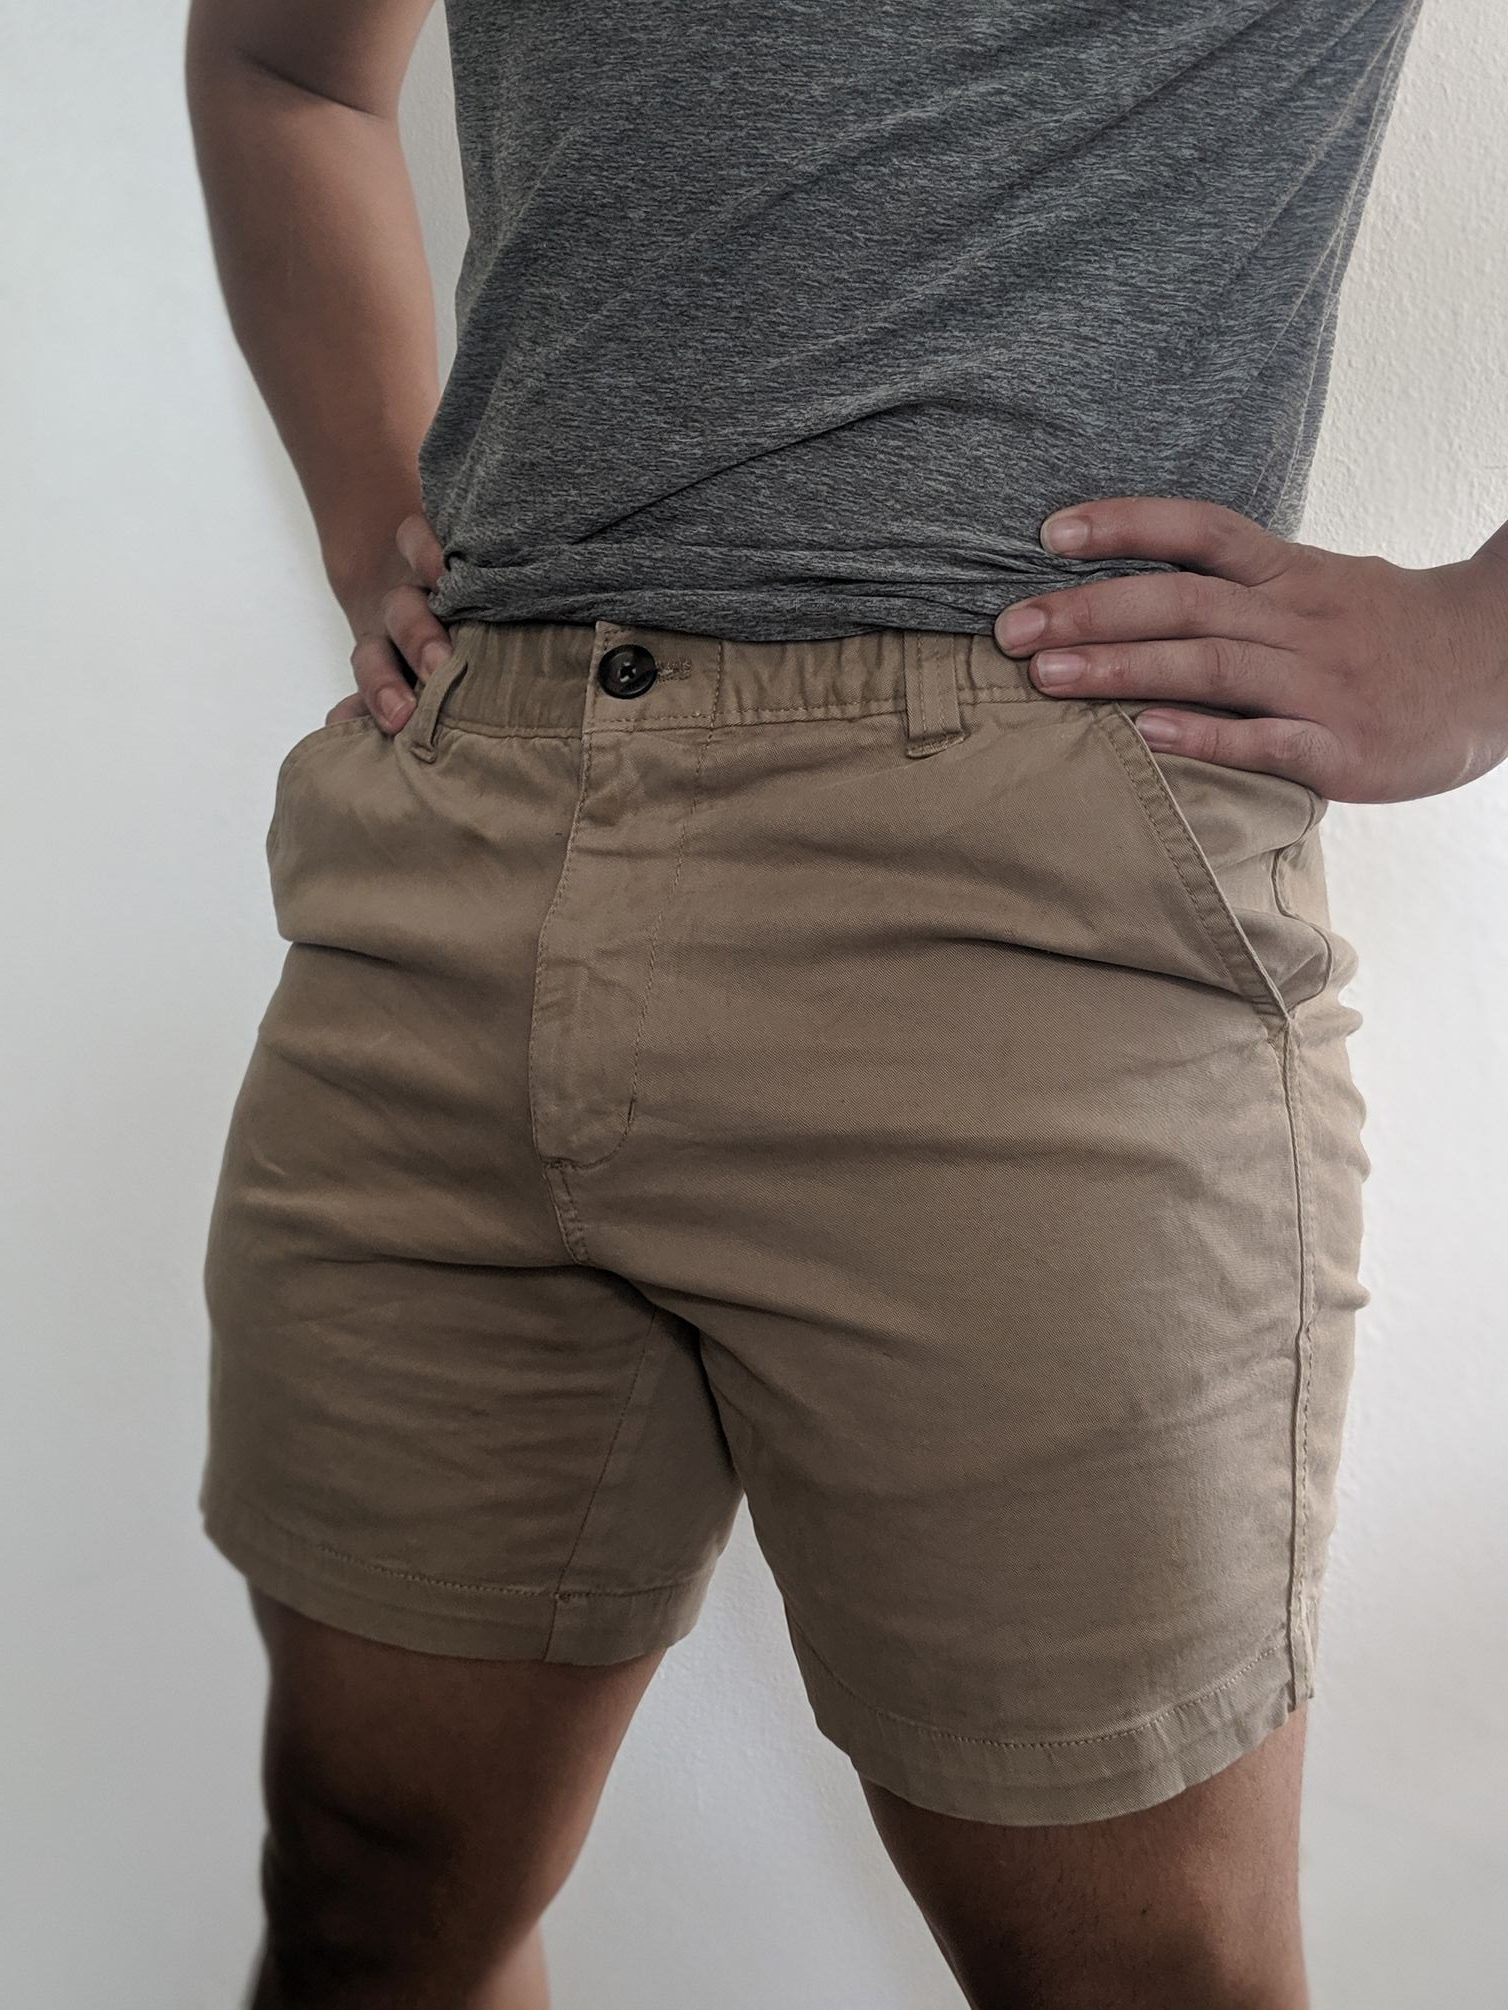 Bearbottom shorts front